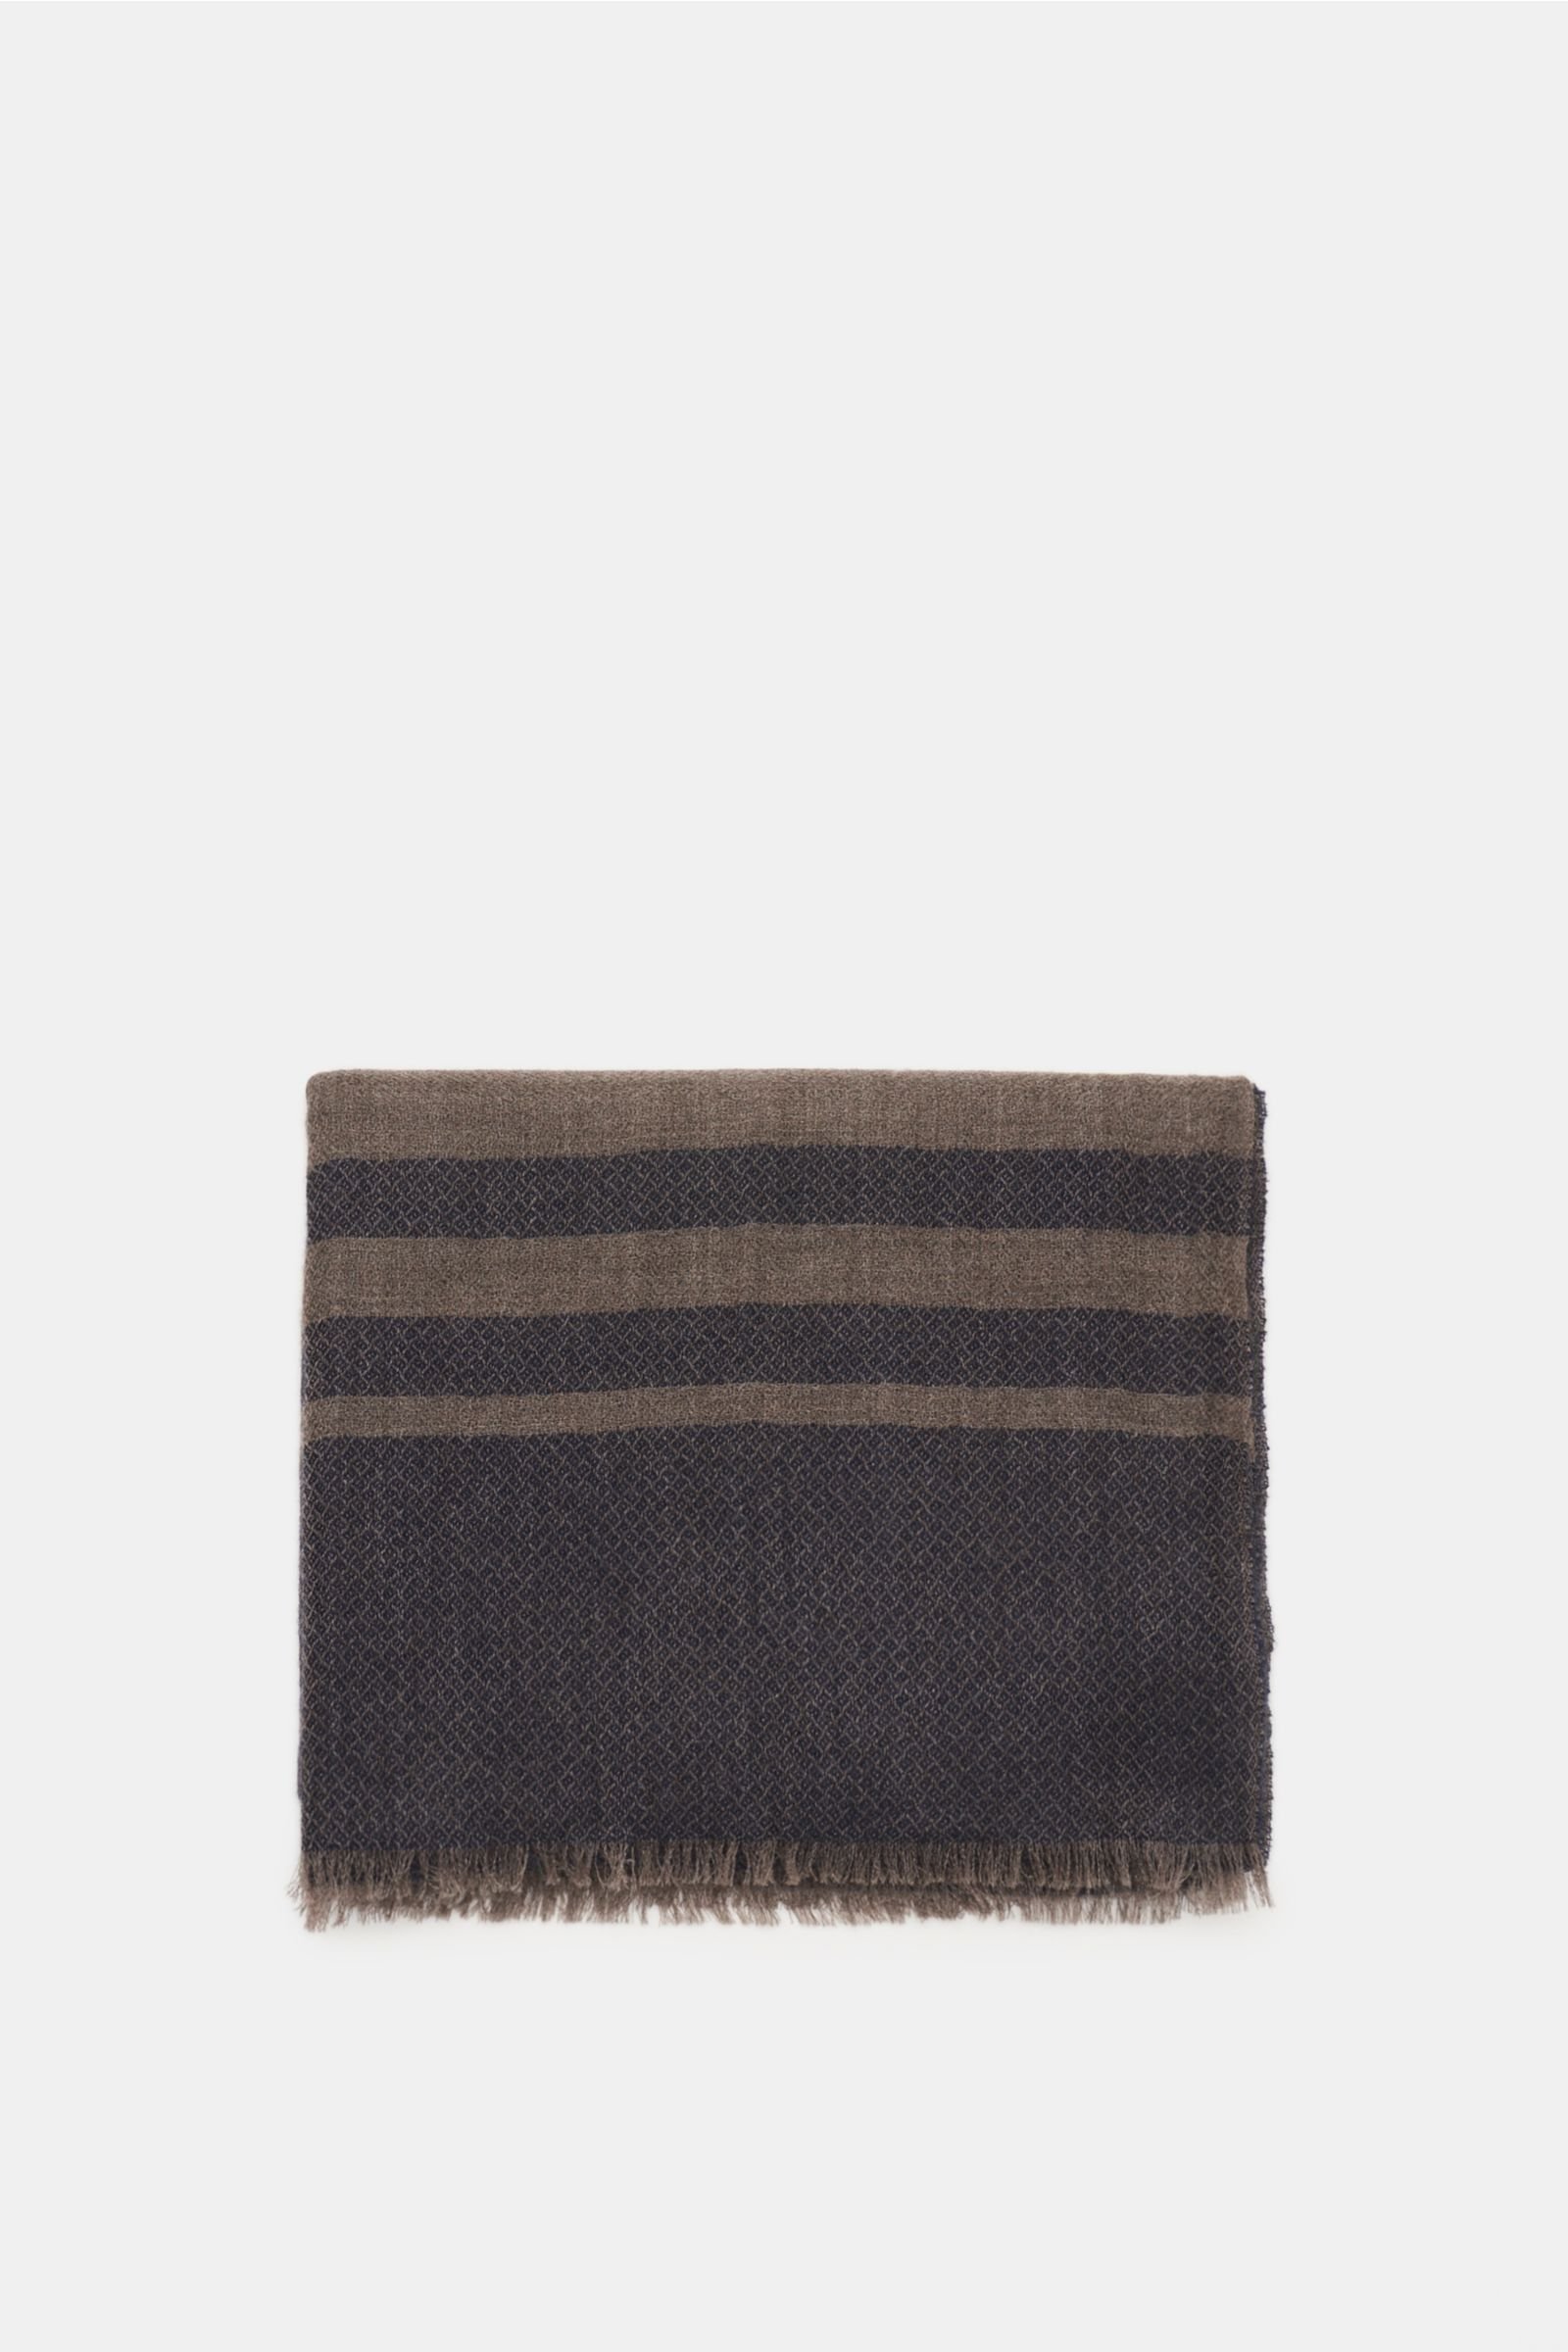 Cashmere scarf navy/grey-brown patterned